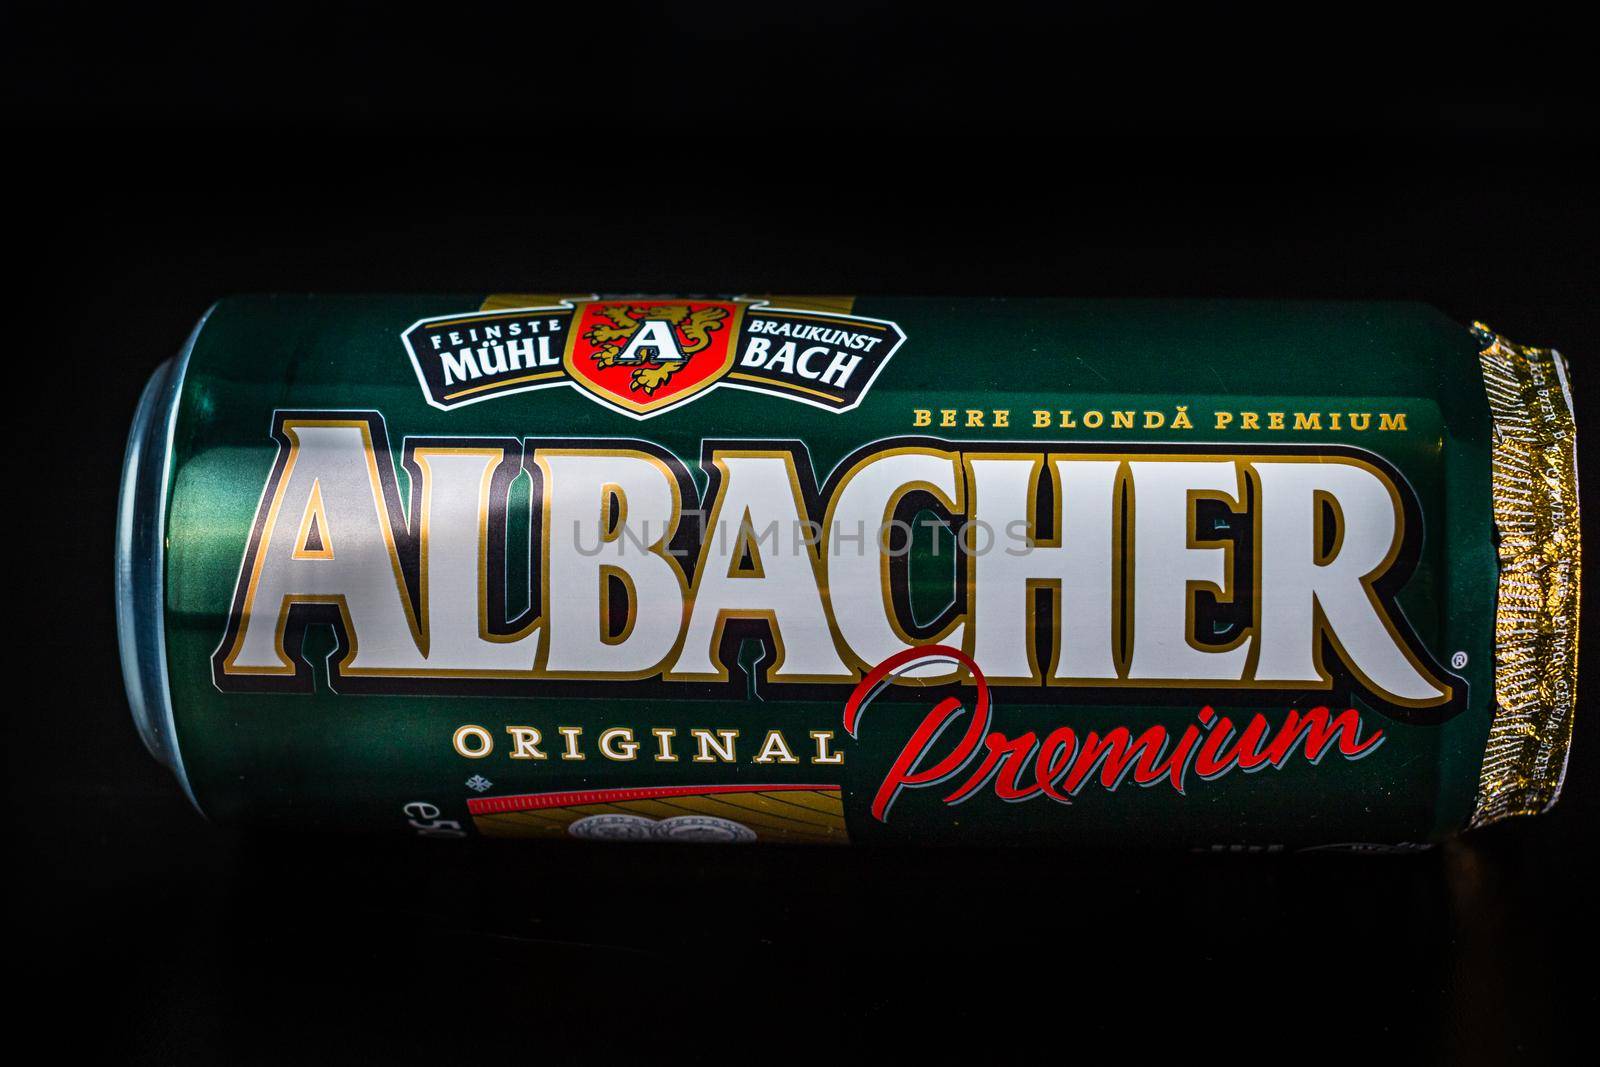 Albacher beer can isolated on black background. Bucharest, Romania, 2021